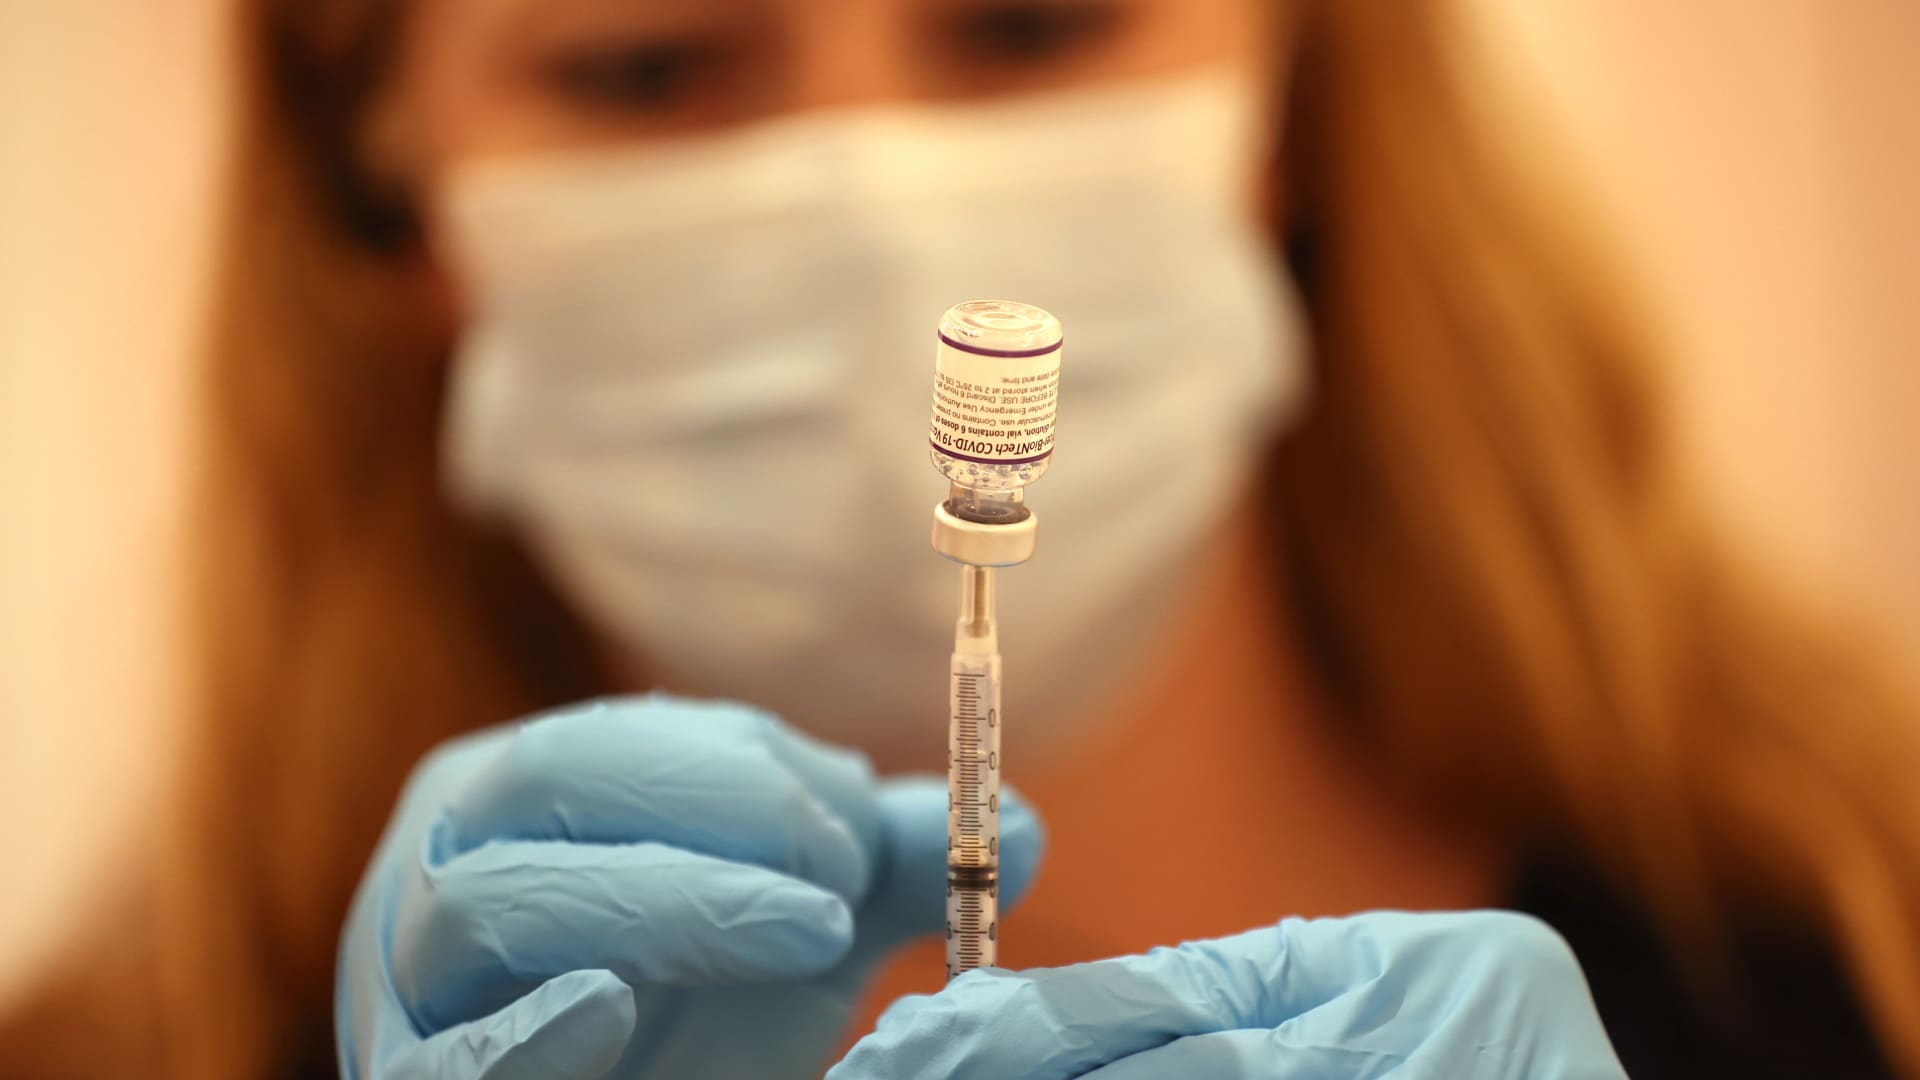 Safeway pharmacist Ashley McGee fills a syringe with the Pfizer COVID-19 booster vaccination at a vaccination booster shot clinic on October 01, 2021 in San Rafael, California.